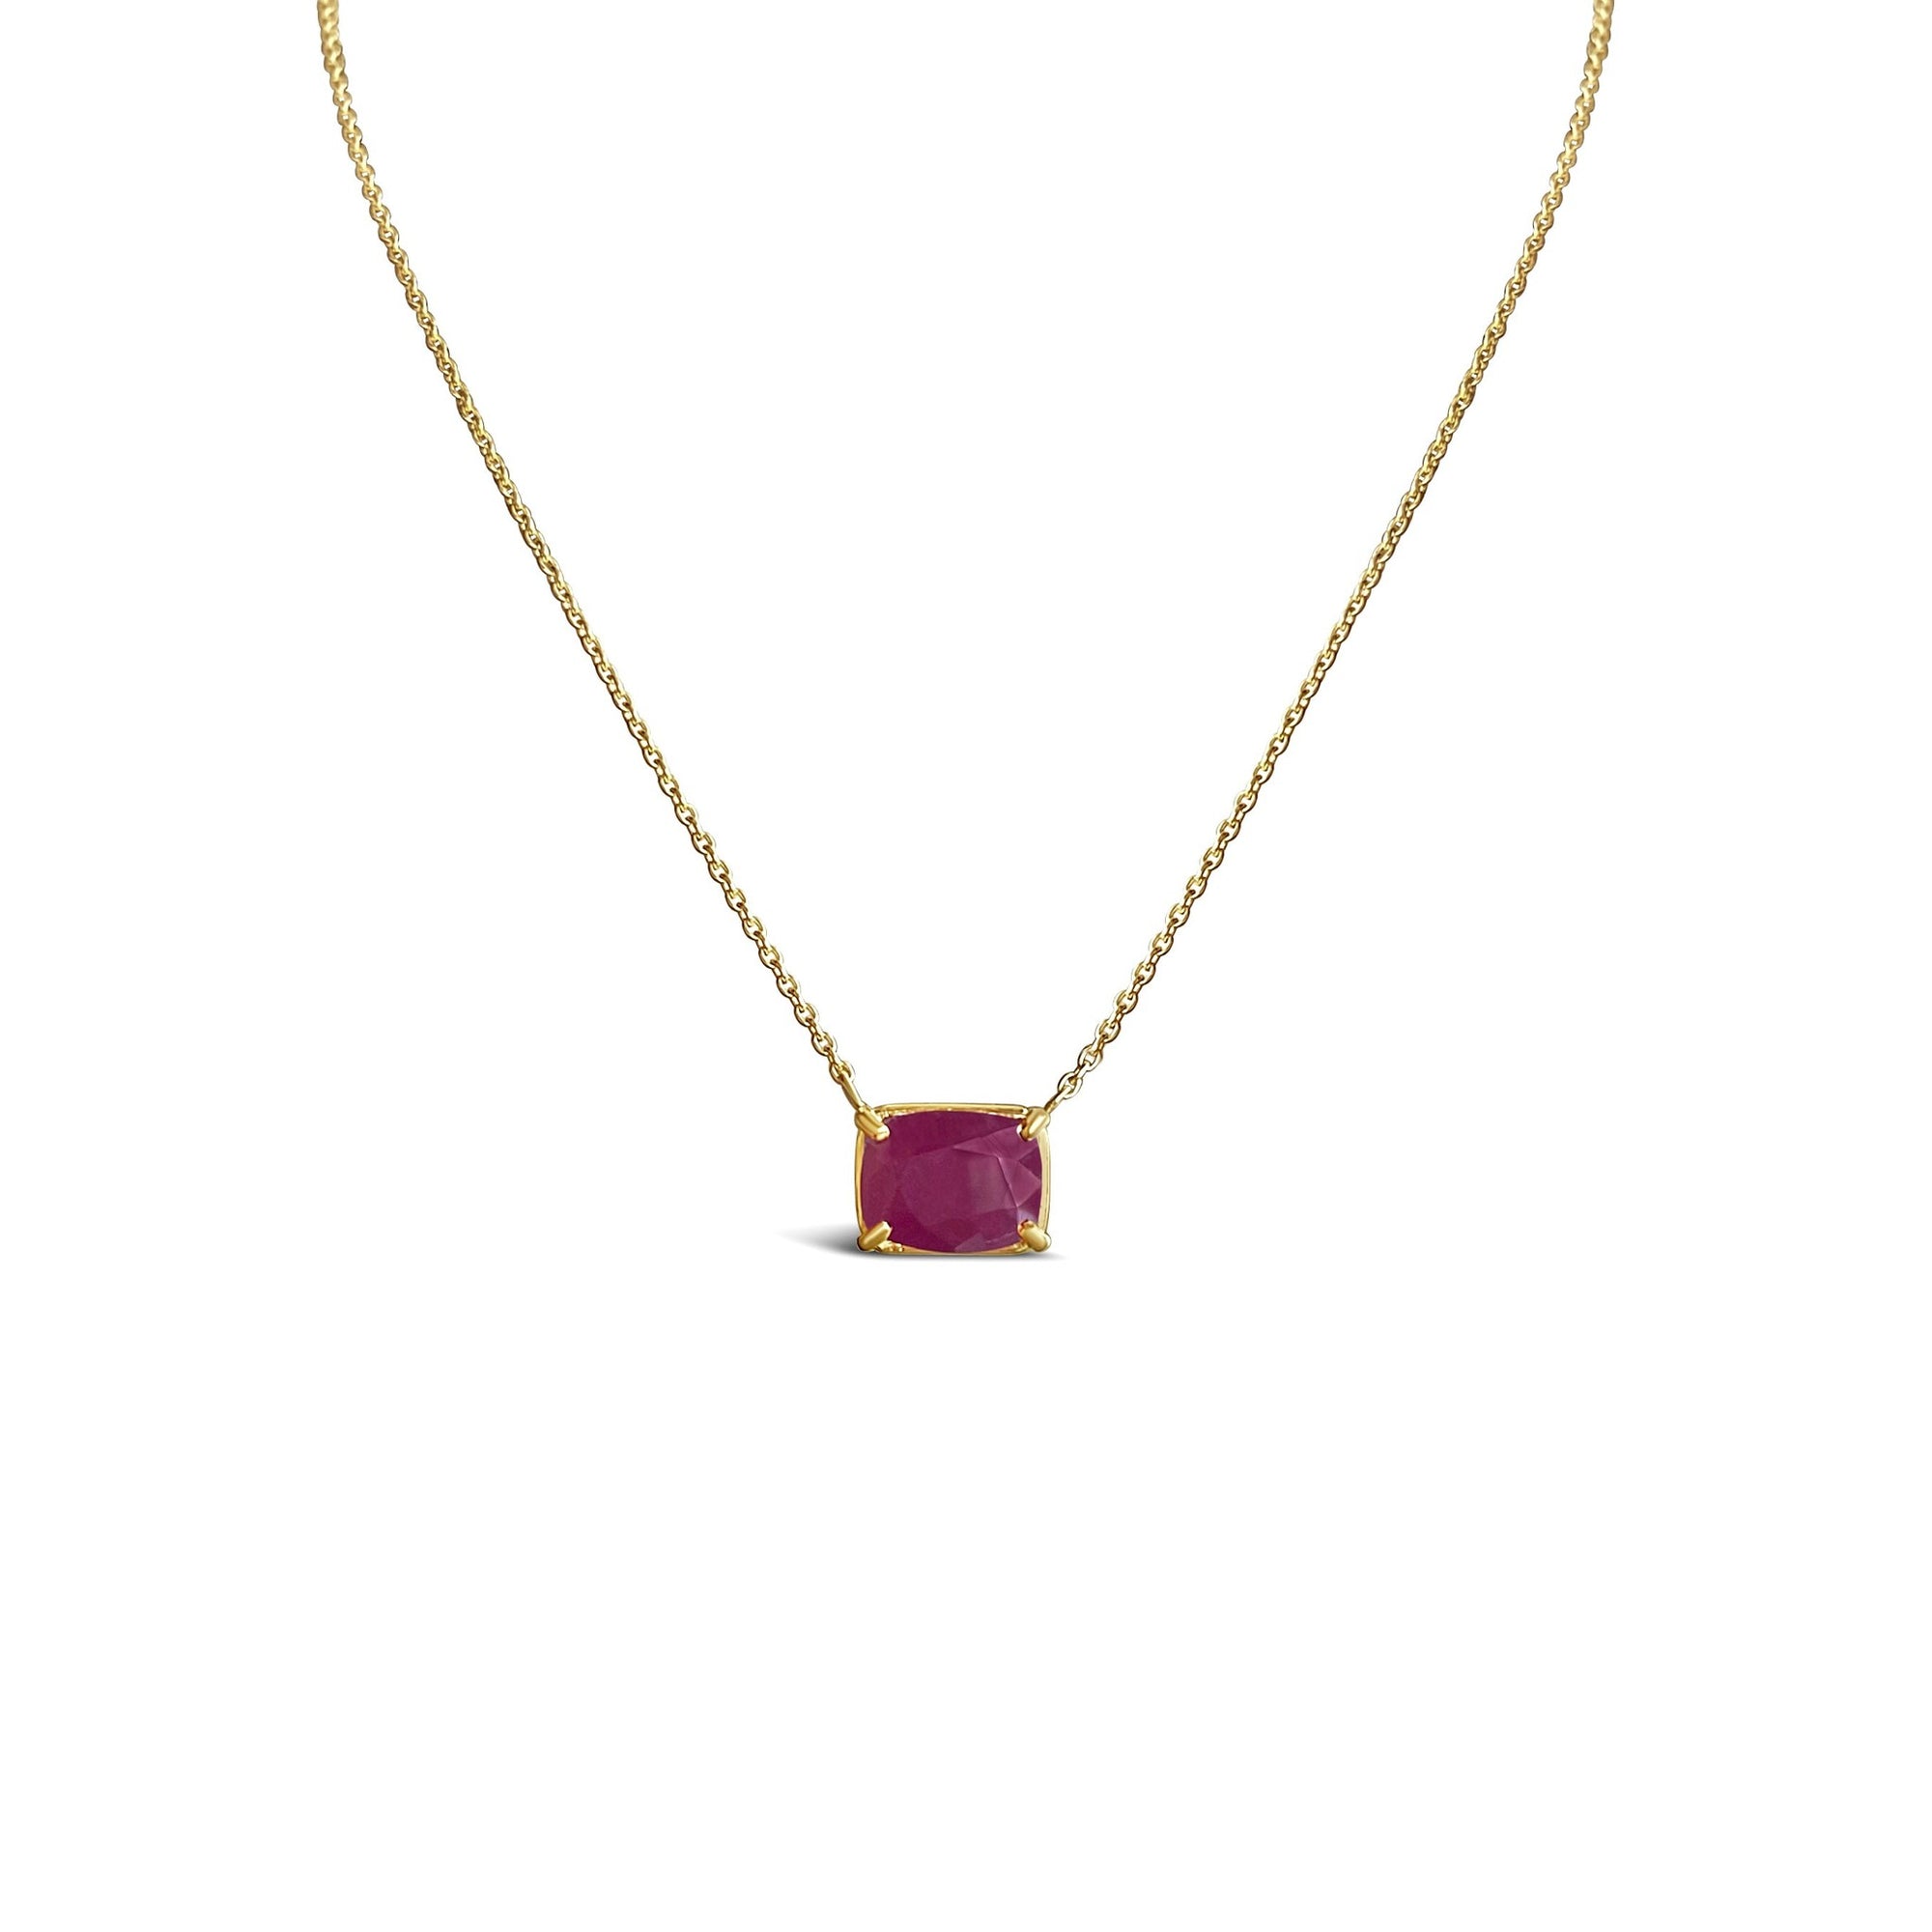 Astrological Gem Ruby Necklace For The Vedic Sun